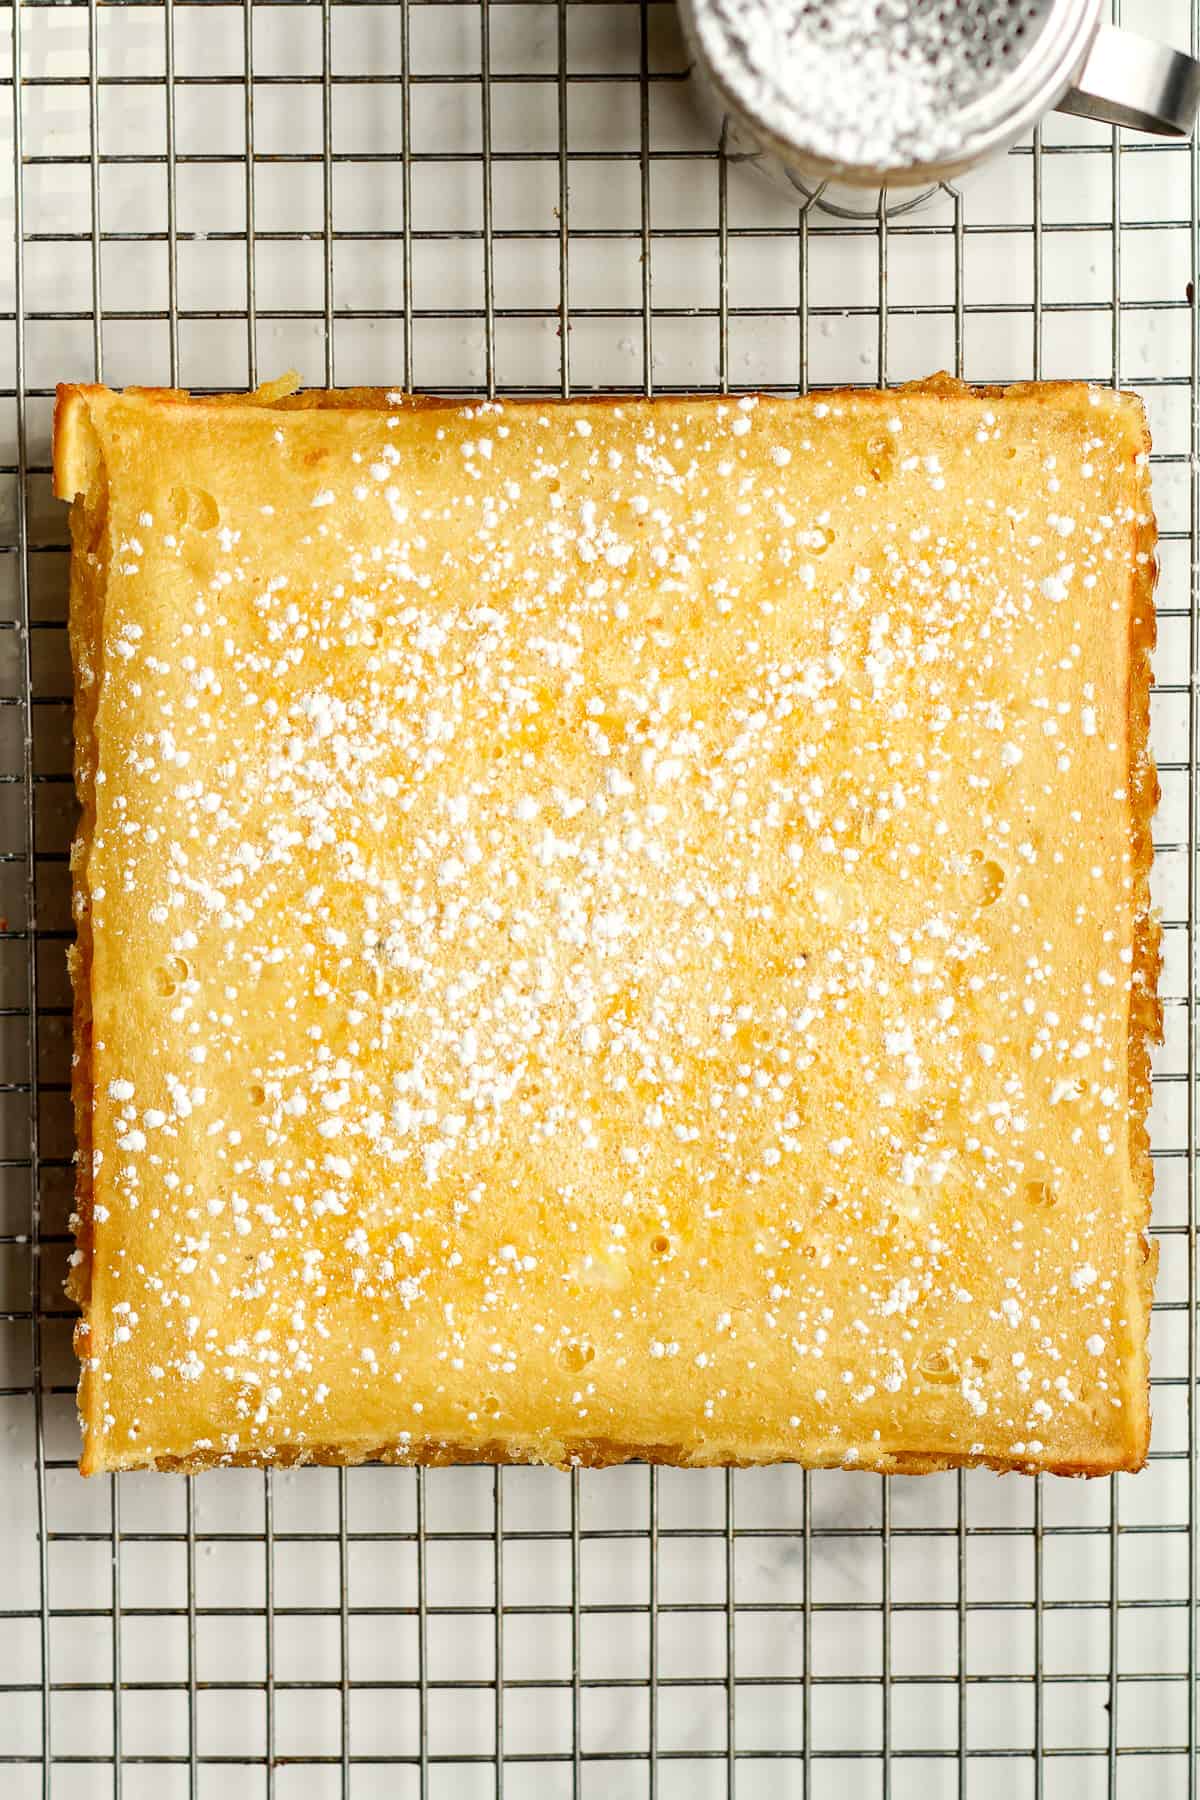 A cooling rack of the square lemon bars with powdered sugar.